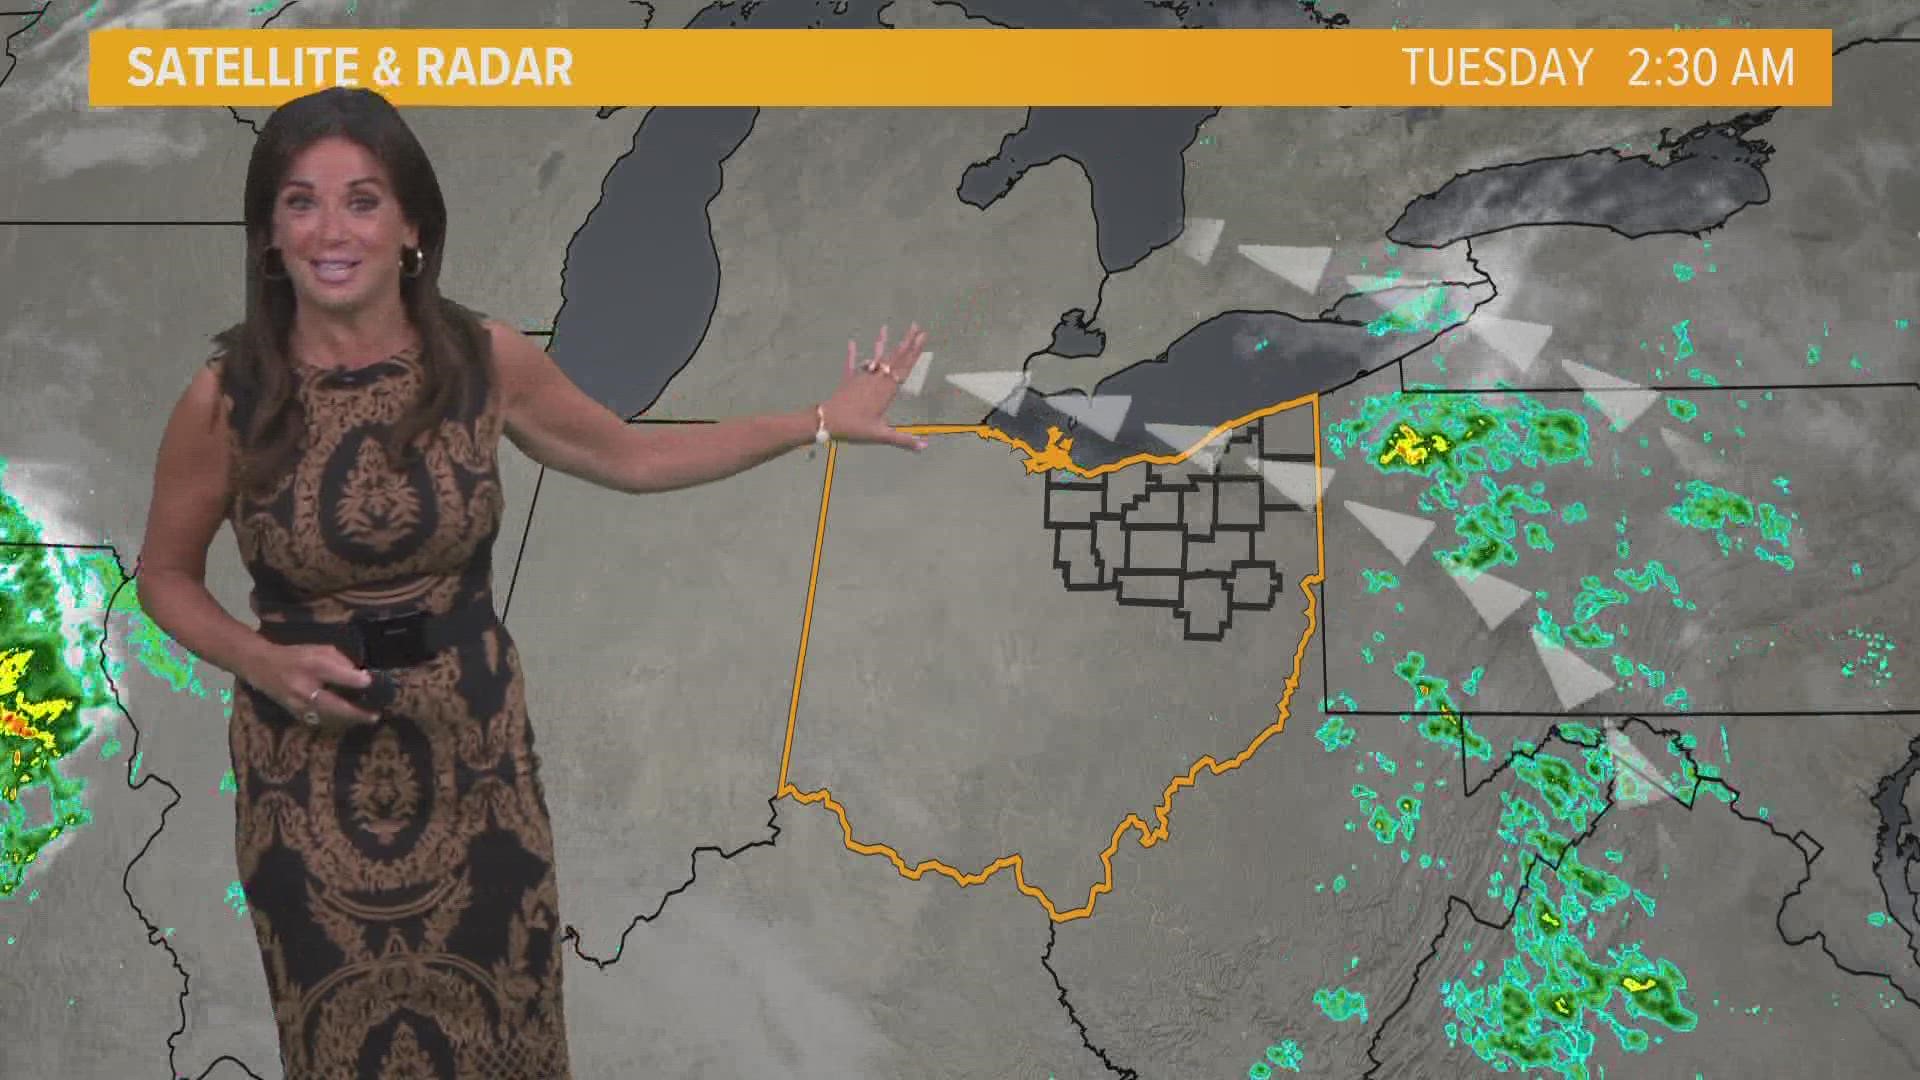 We've got scattered rain chances today -- especially for areas east. Hollie Strano has the hour-by-hour details in her morning weather forecast for August 16, 2022.